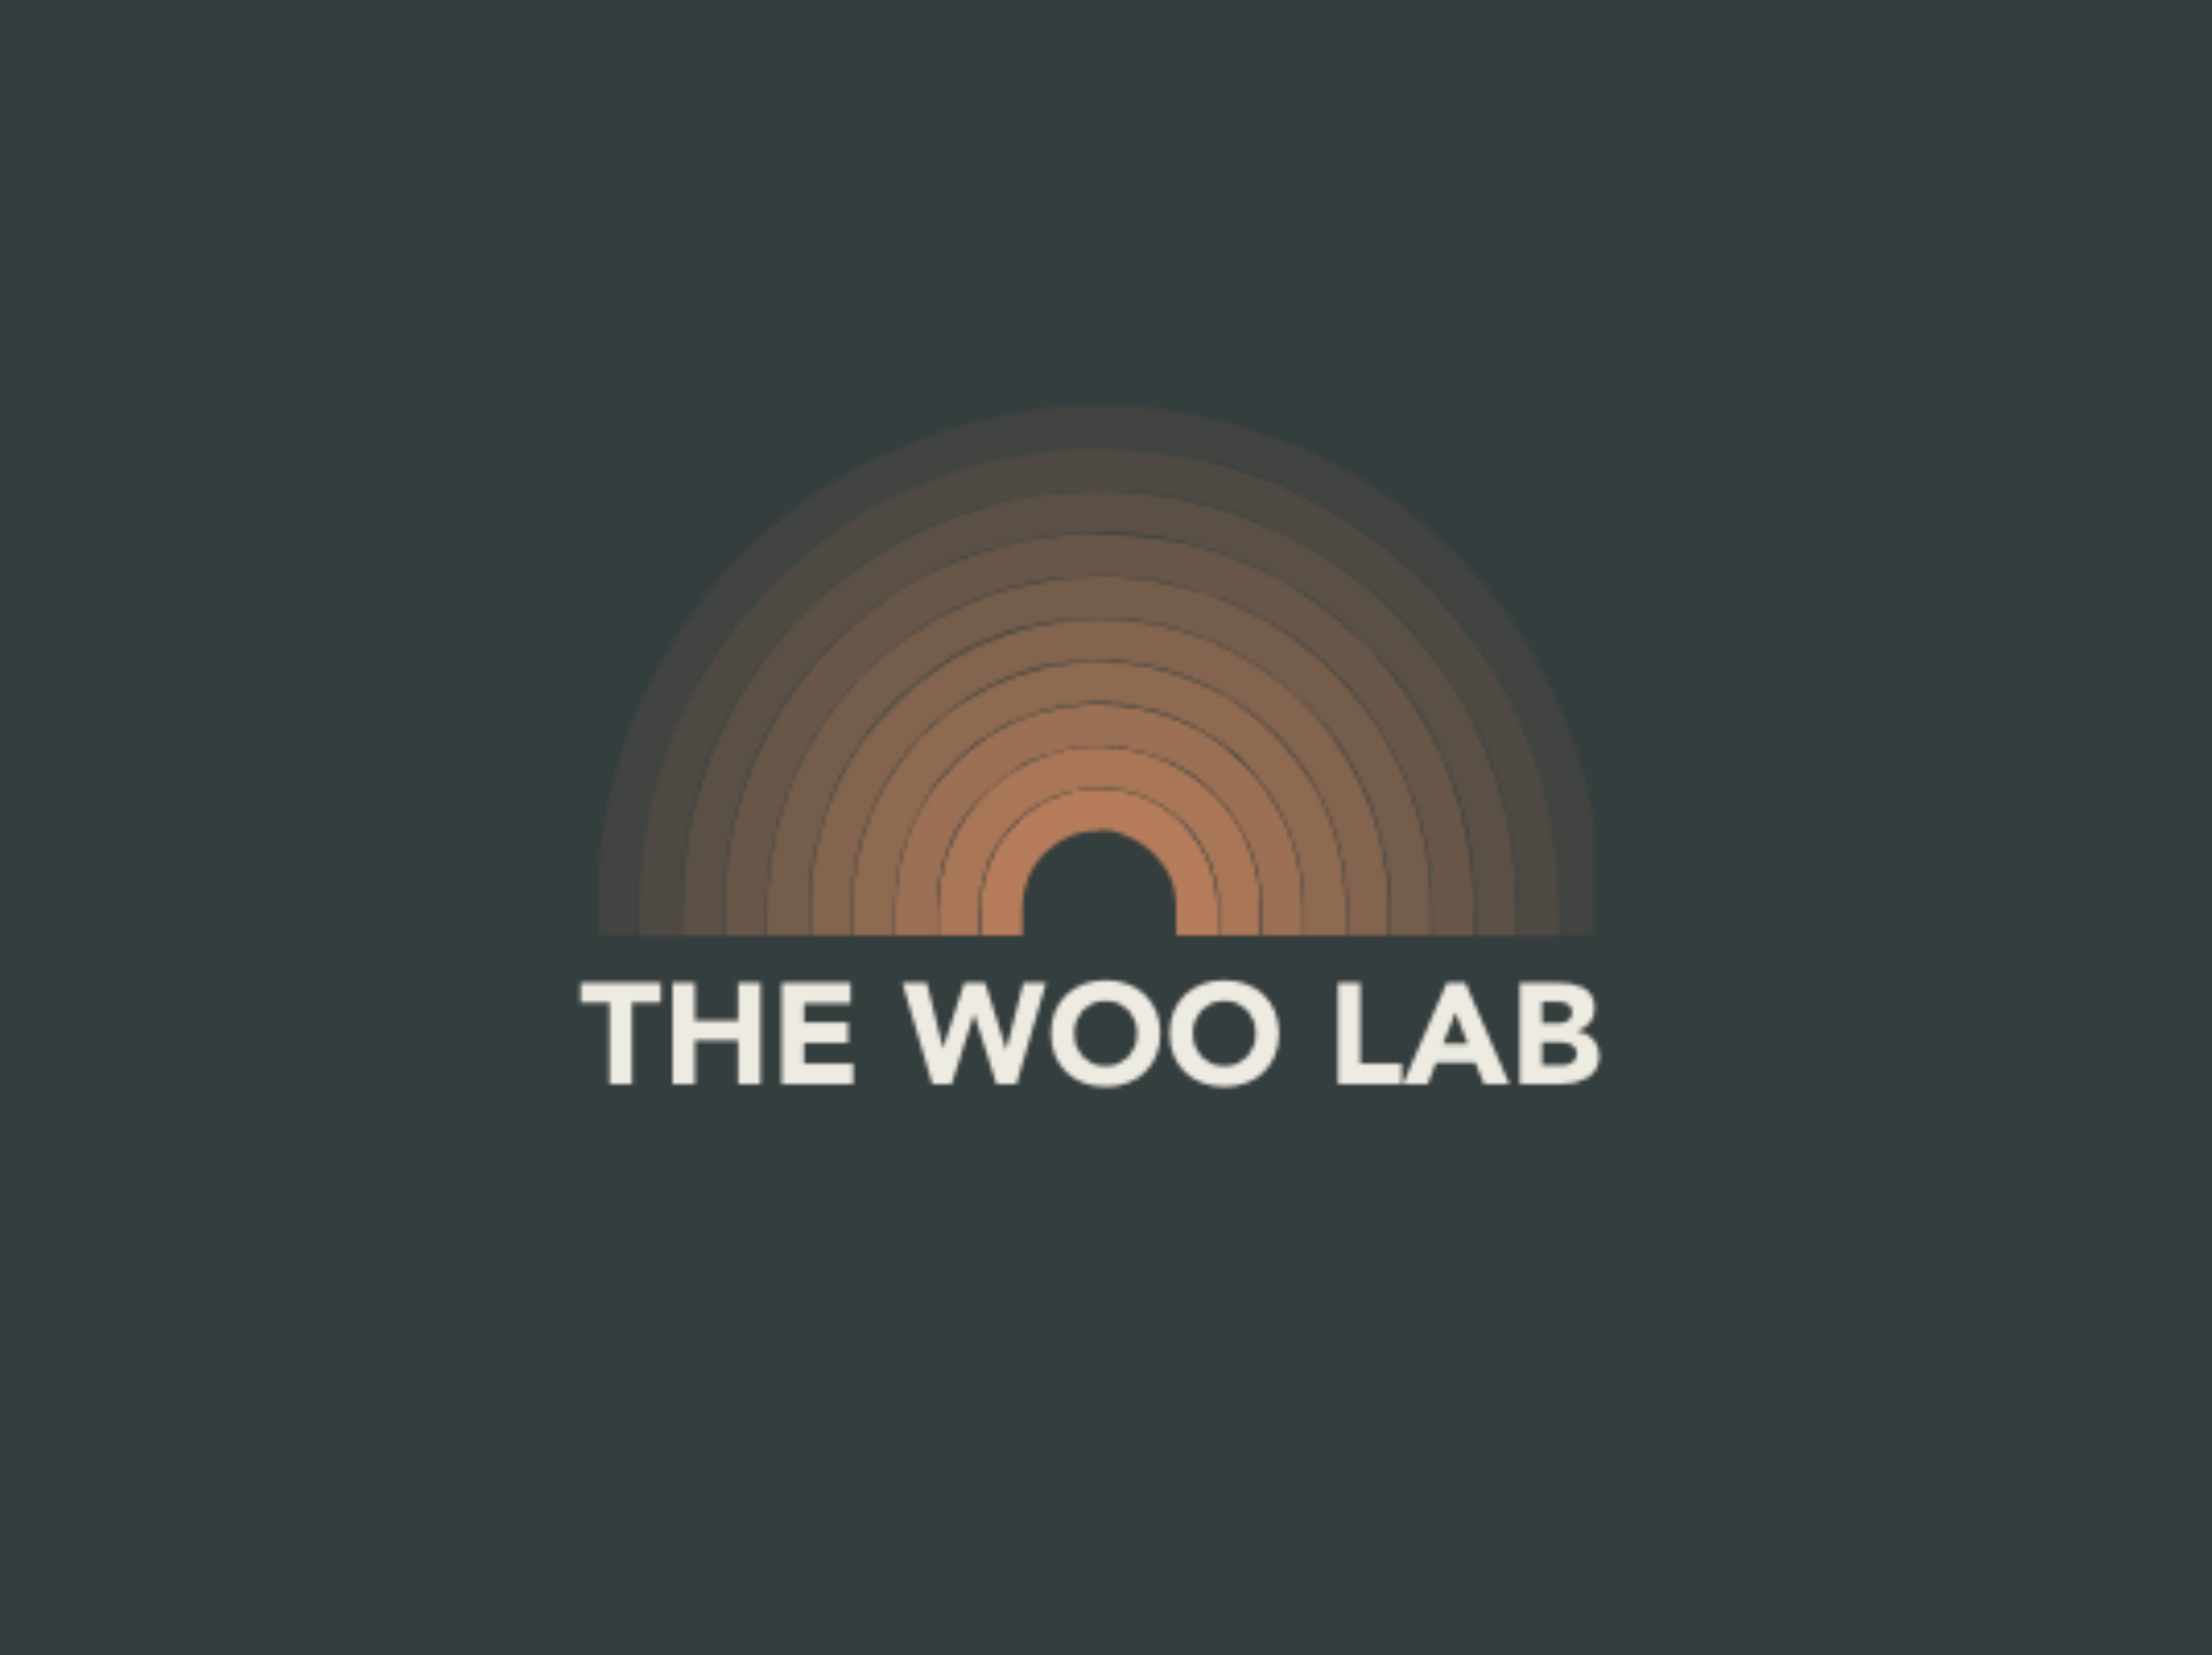 The Woo Lab Podcast launches its first season Tuesday April 19